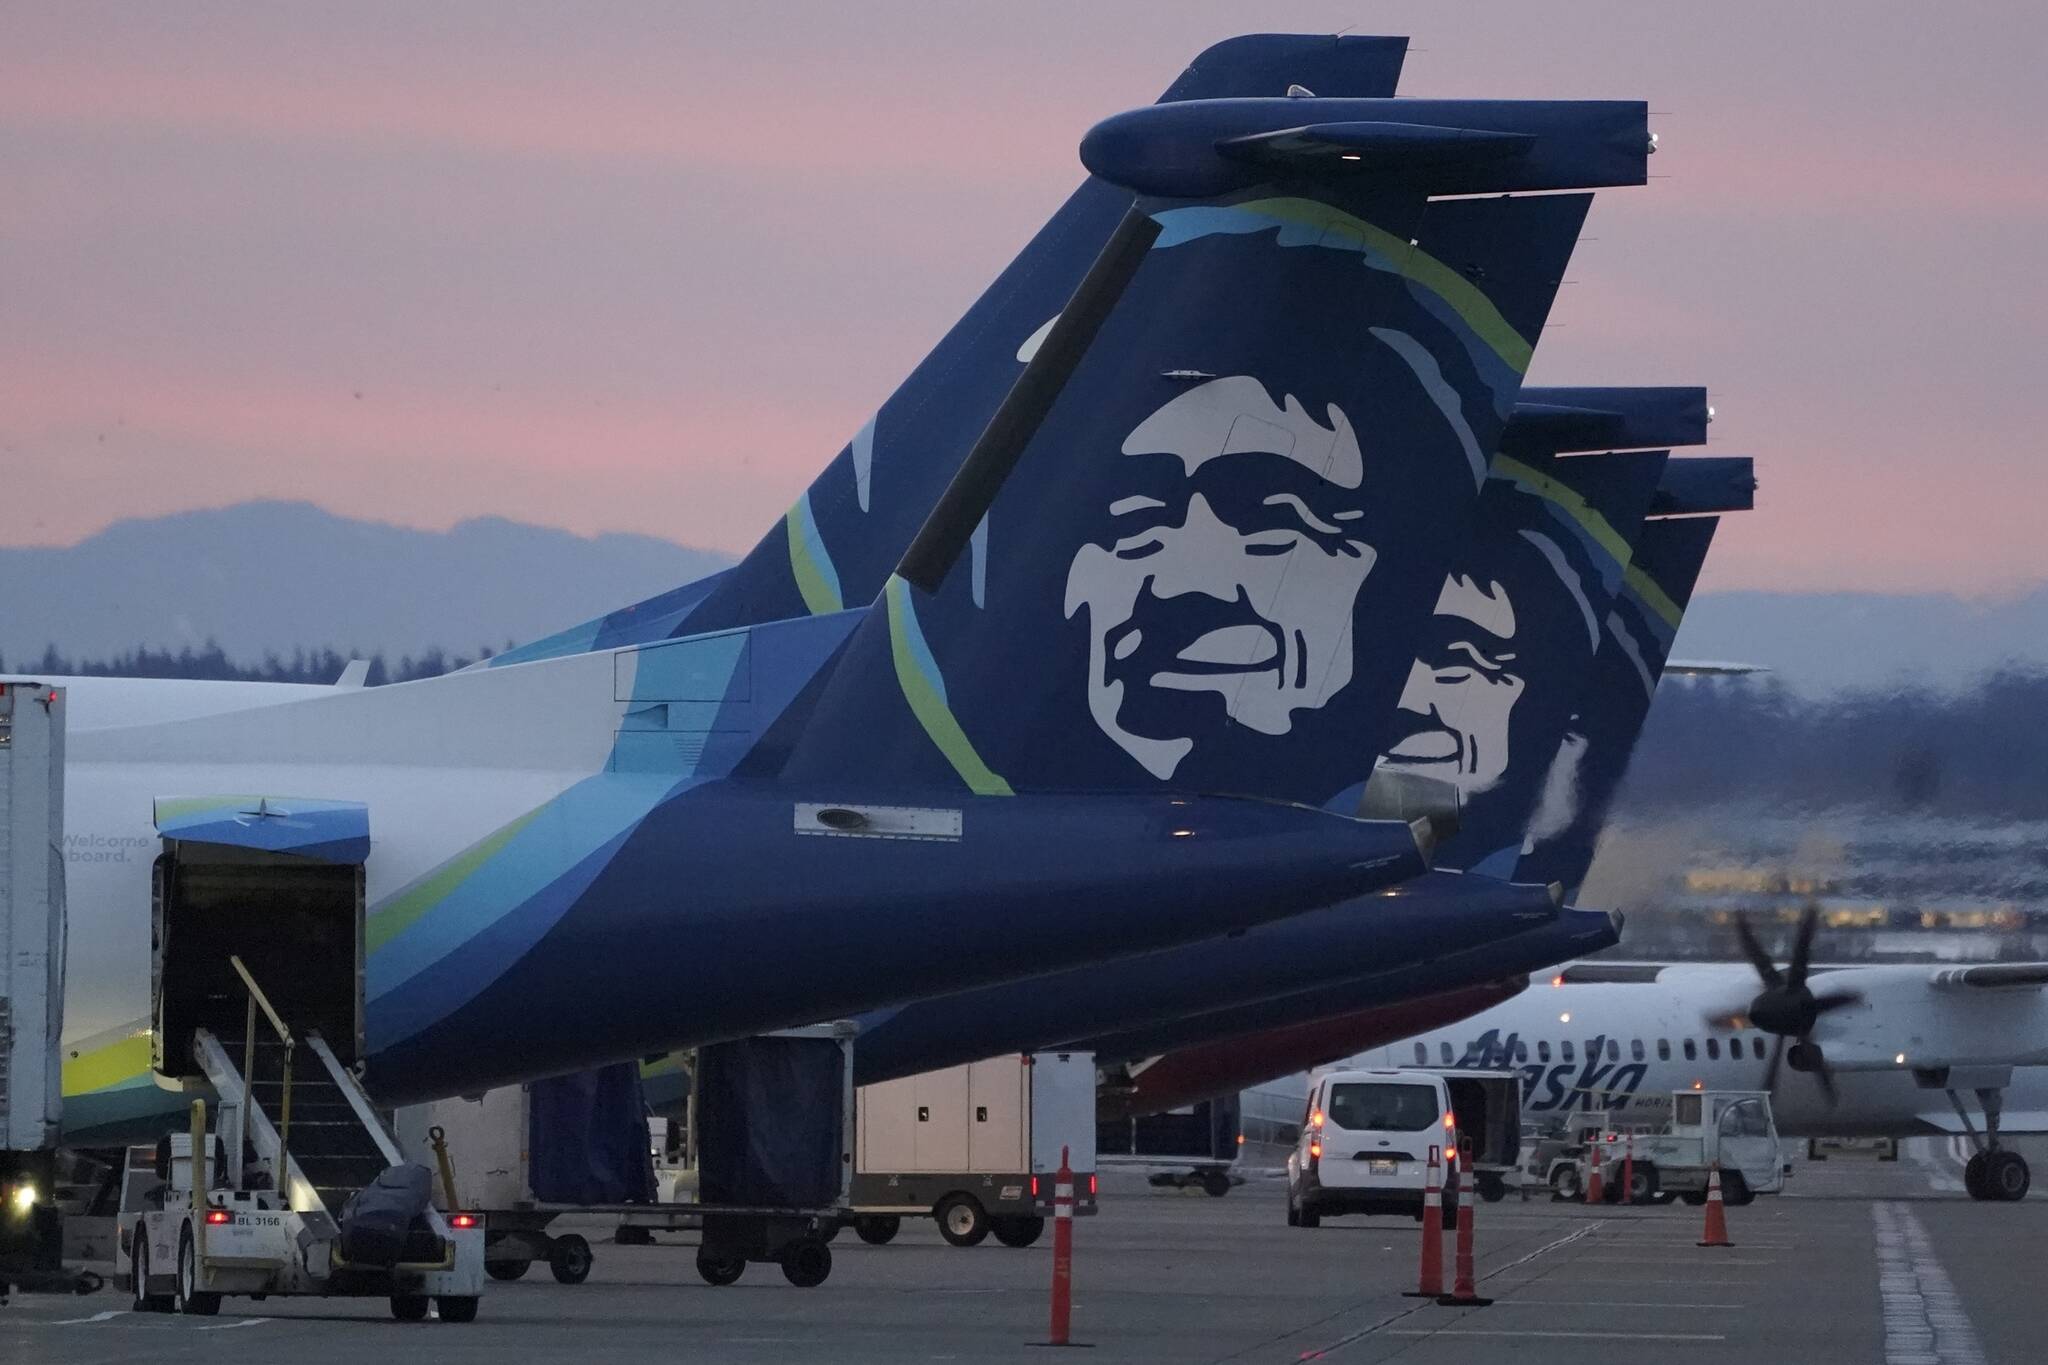 Alaska Airlines planes are shown parked at gates at sunrise, March 1, 2021, at Seattle-Tacoma International Airport in Seattle. An Alaska Airlines flight made an emergency landing in Oregon on Friday after a window and chunk of its fuselage blew out in mid-air, media reports said. (AP Photo/Ted S. Warren, File)